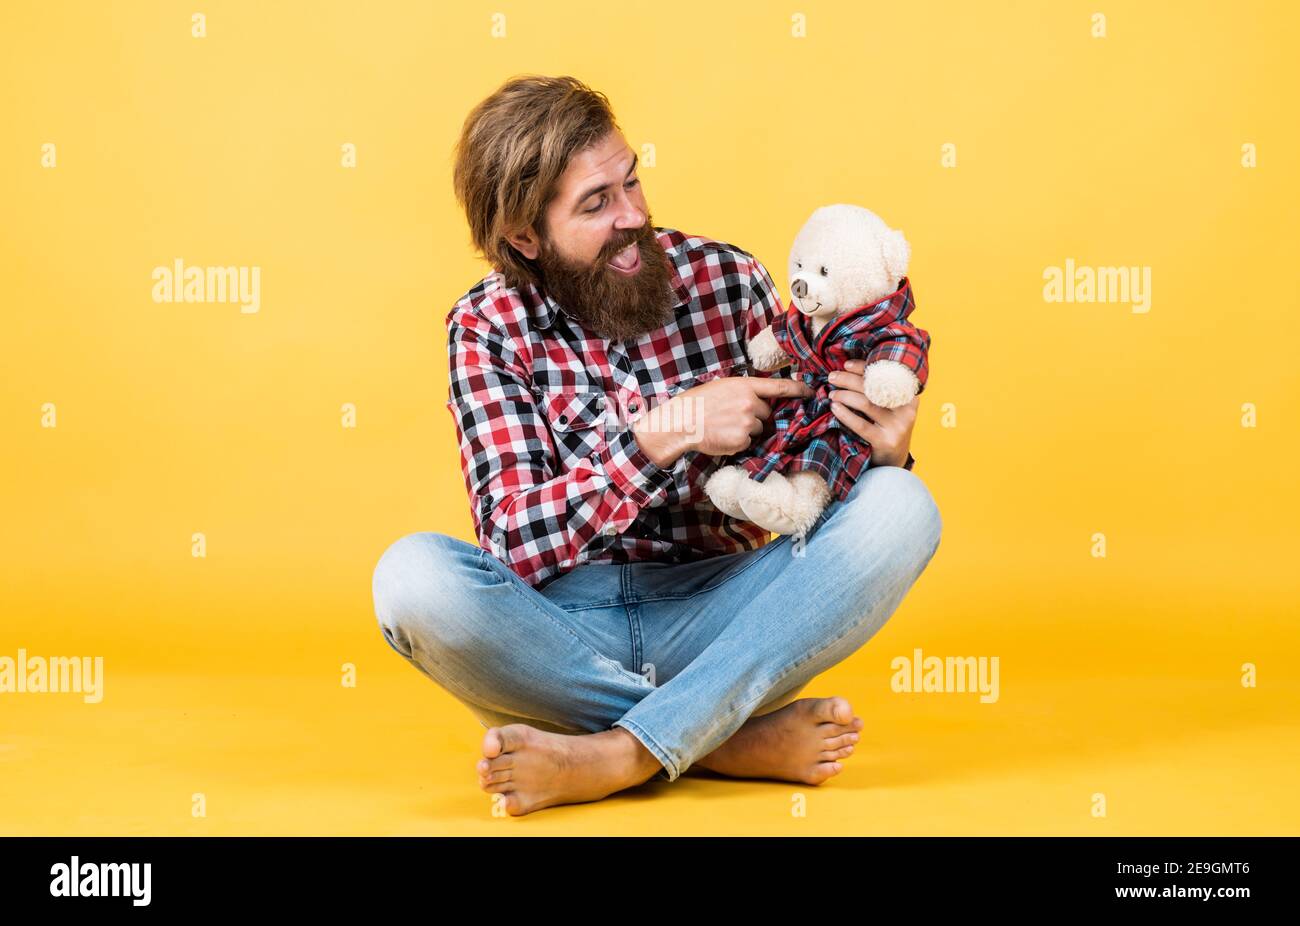 brutal bearded man wear checkered shirt having lush beard and moustache with teddy bear toy, valentines day. Stock Photo